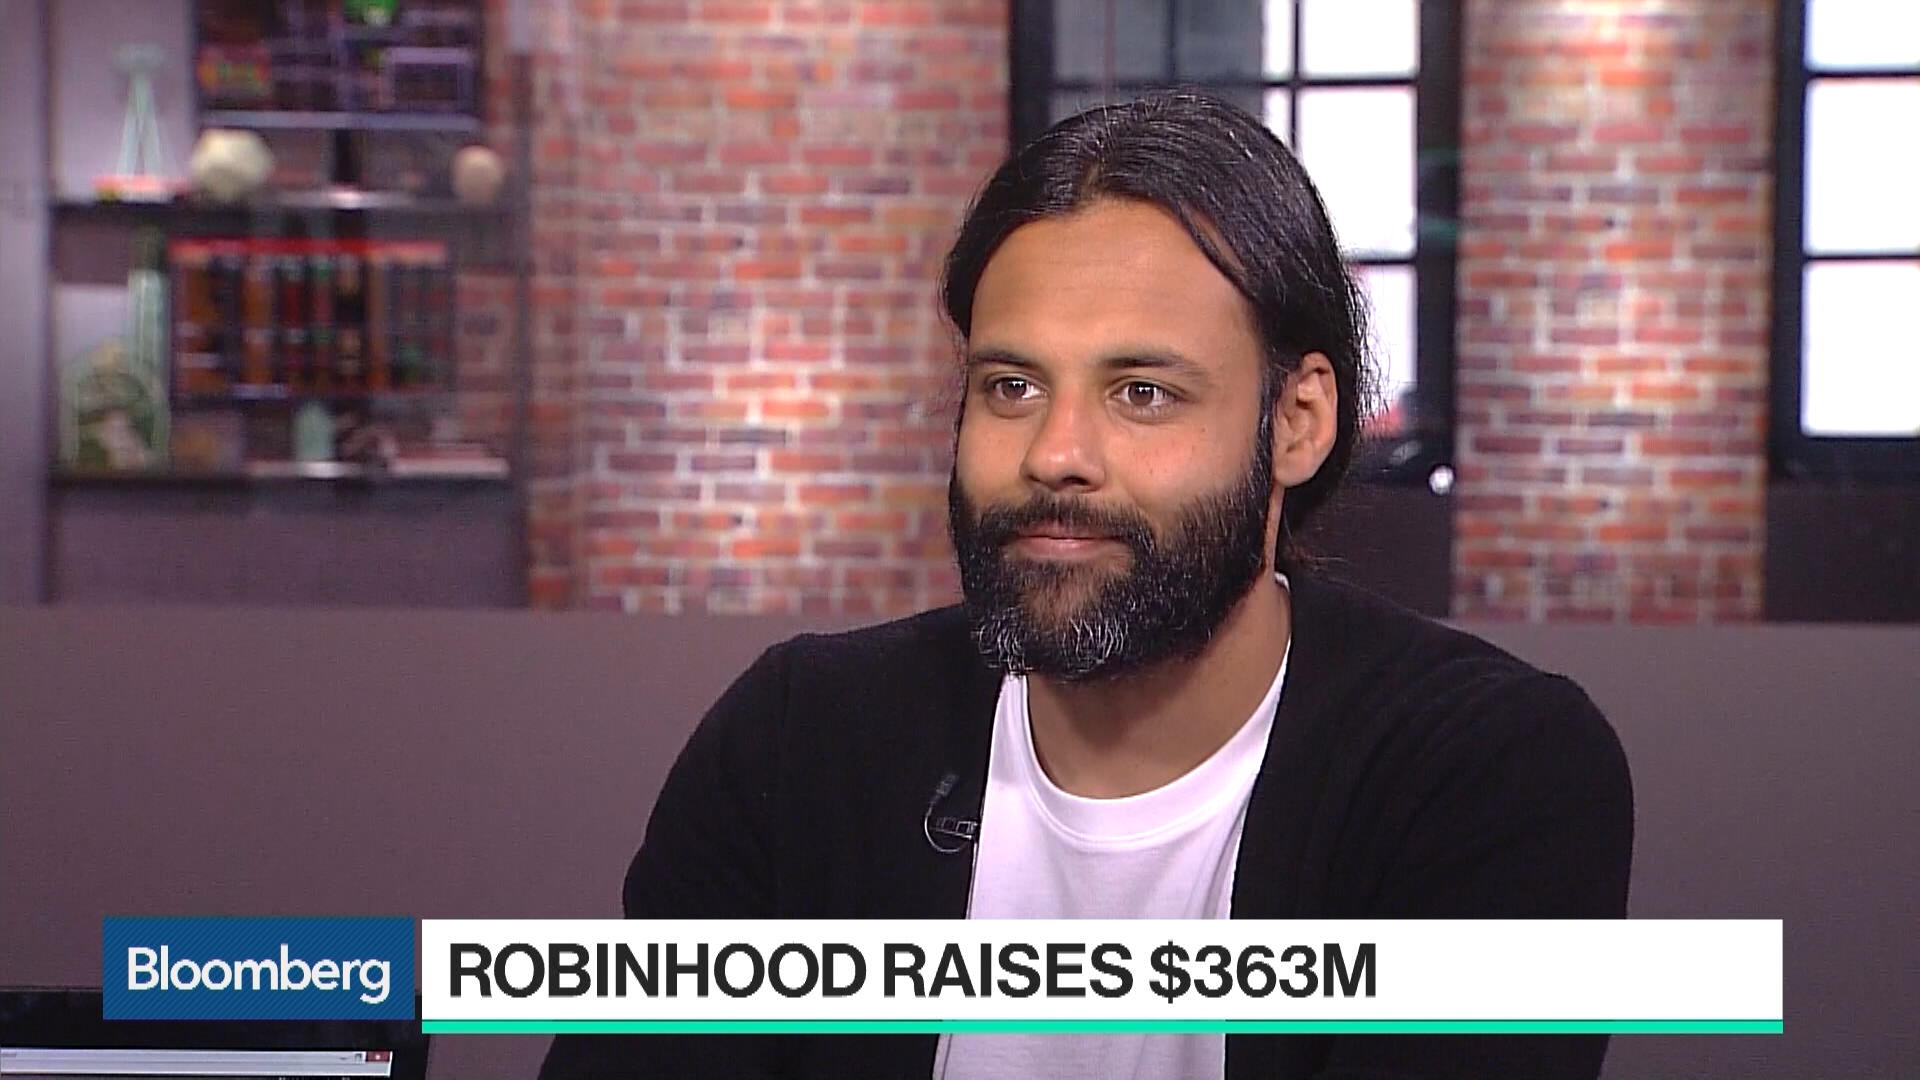 Robinhood Founders Are Billionaires in Silicon Valley ...